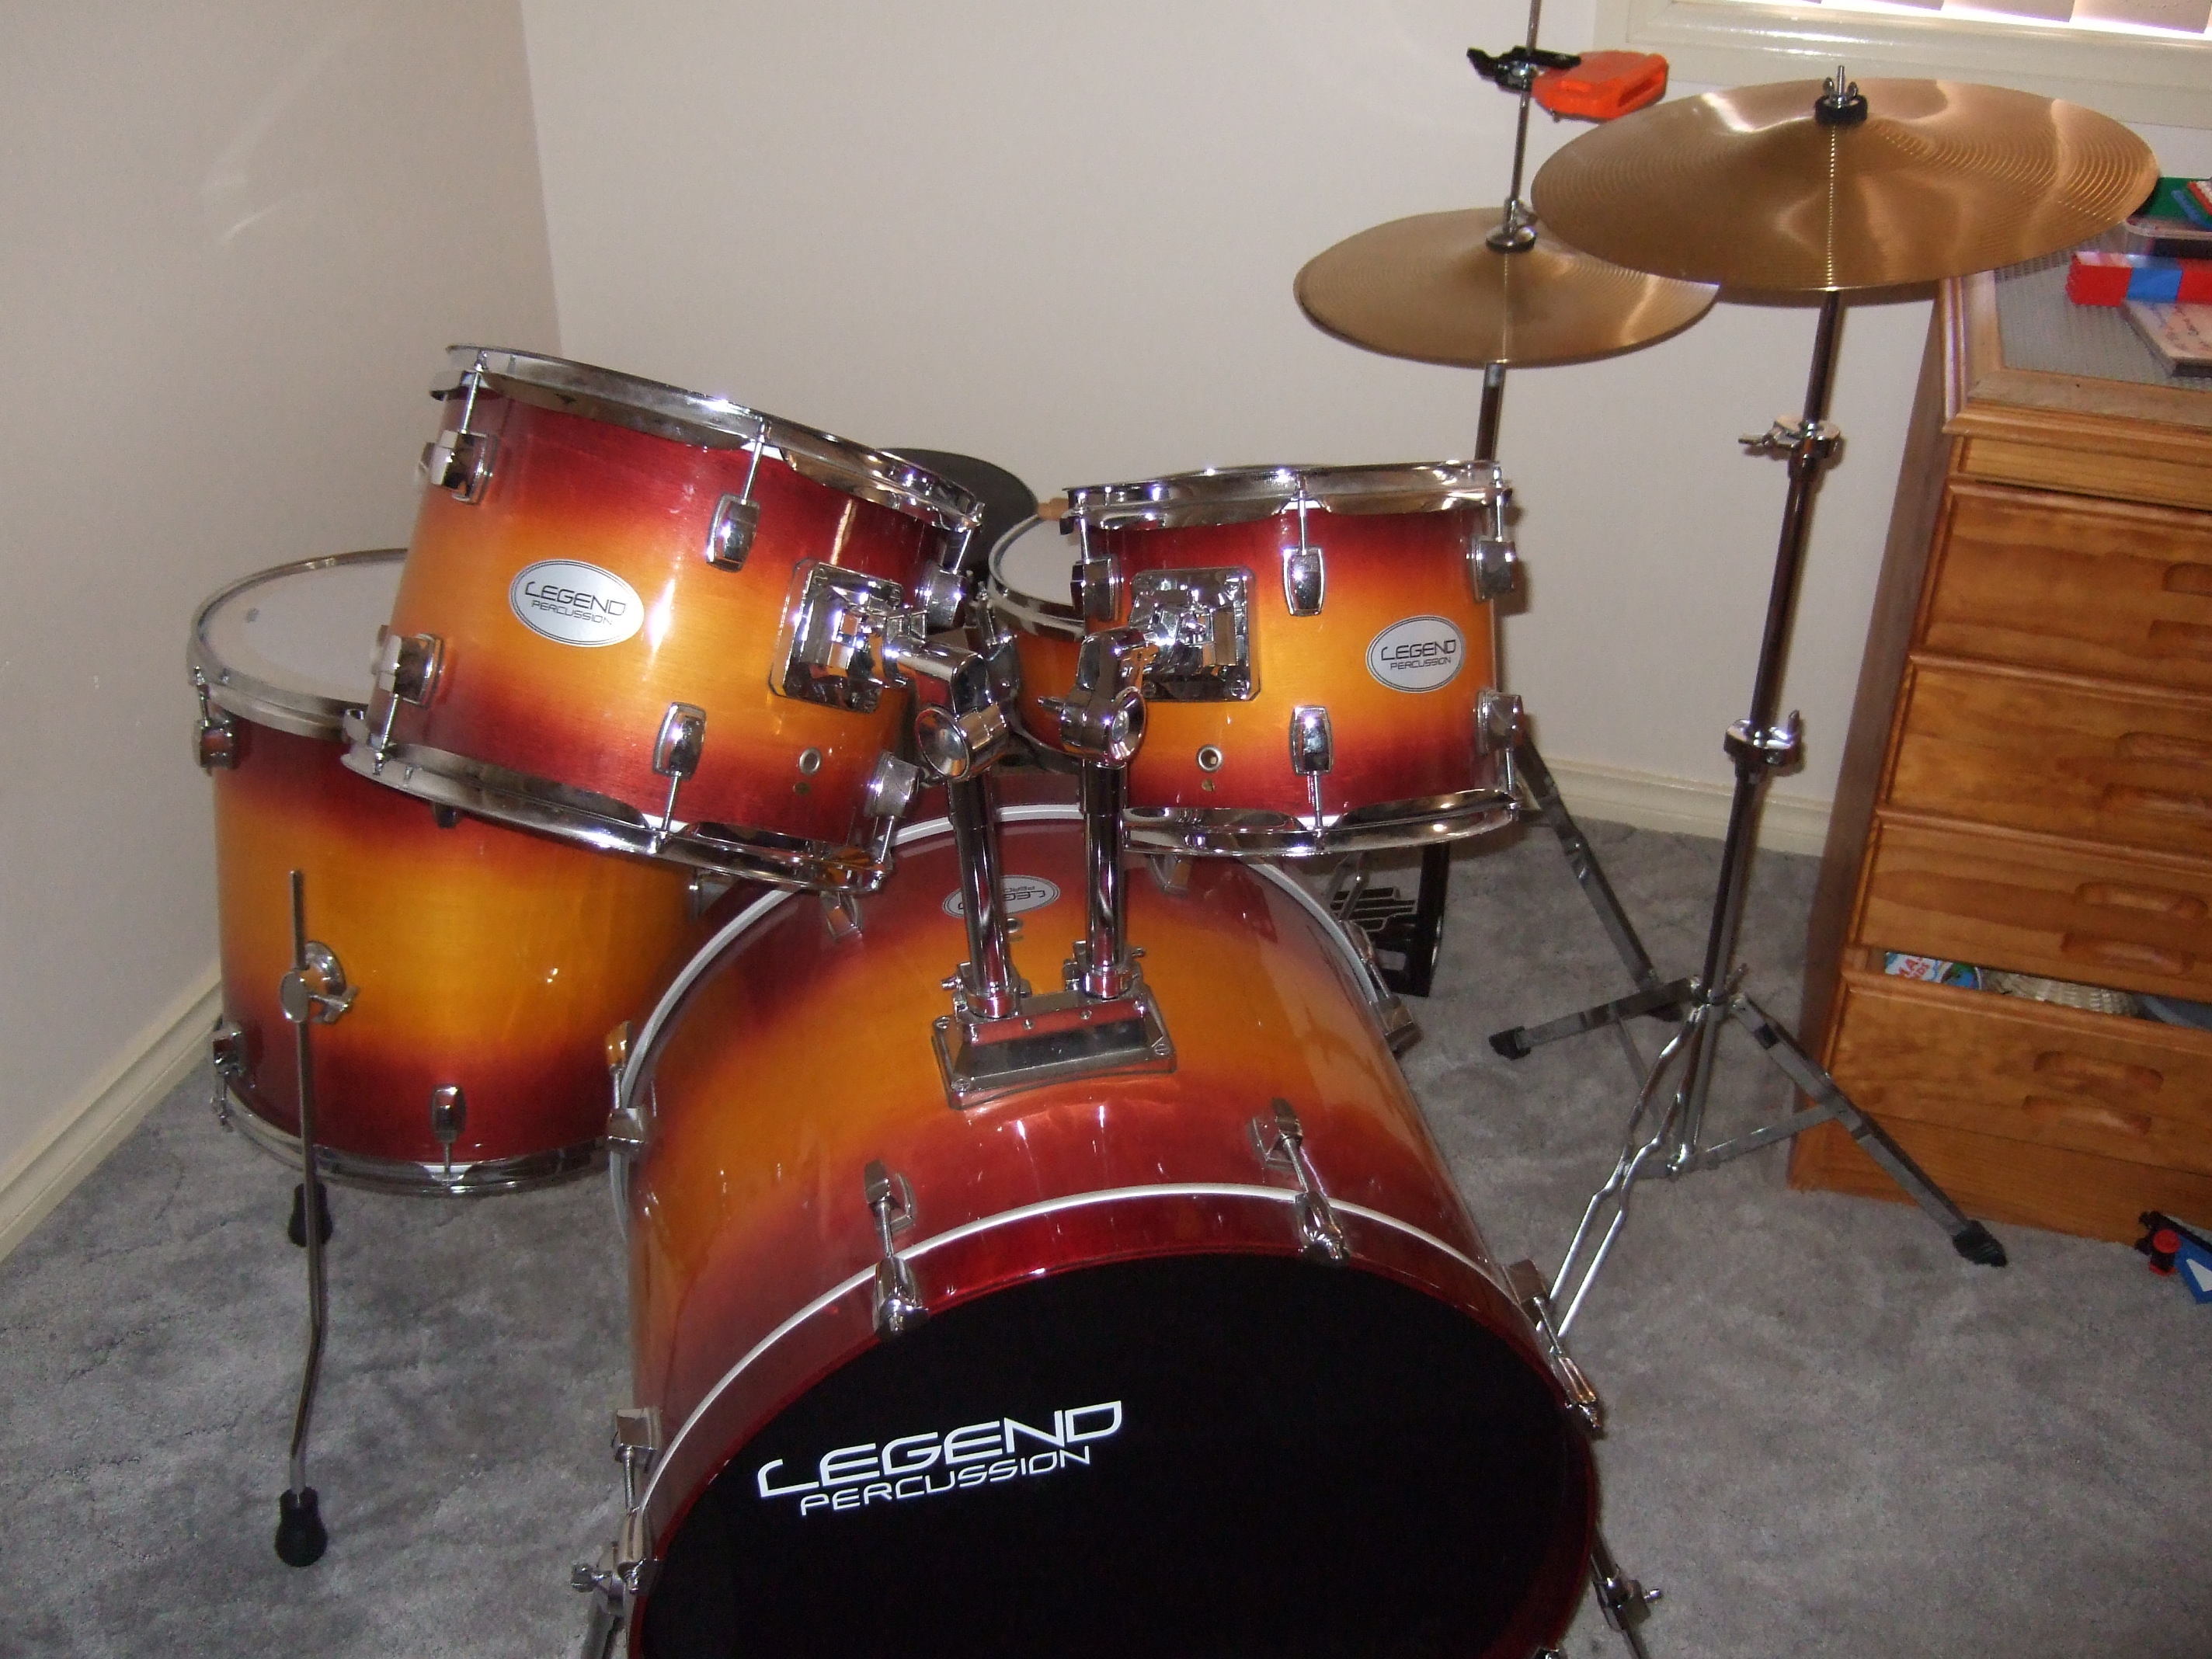 A picture of my first drum kit